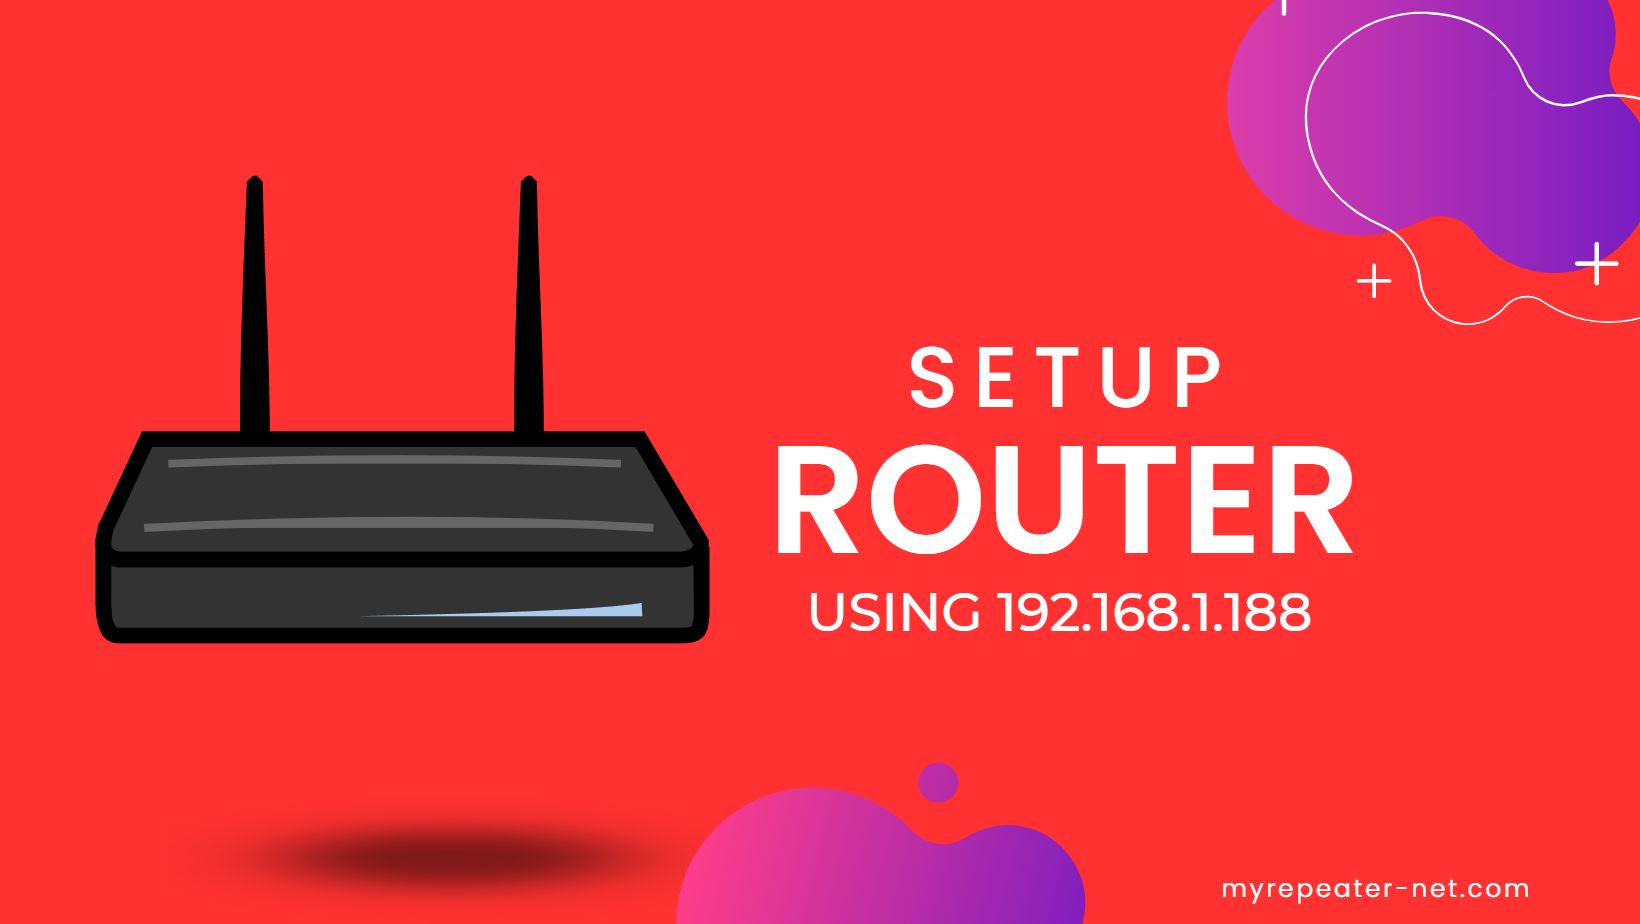 How to Setup Router using 192.168.1.188 IP